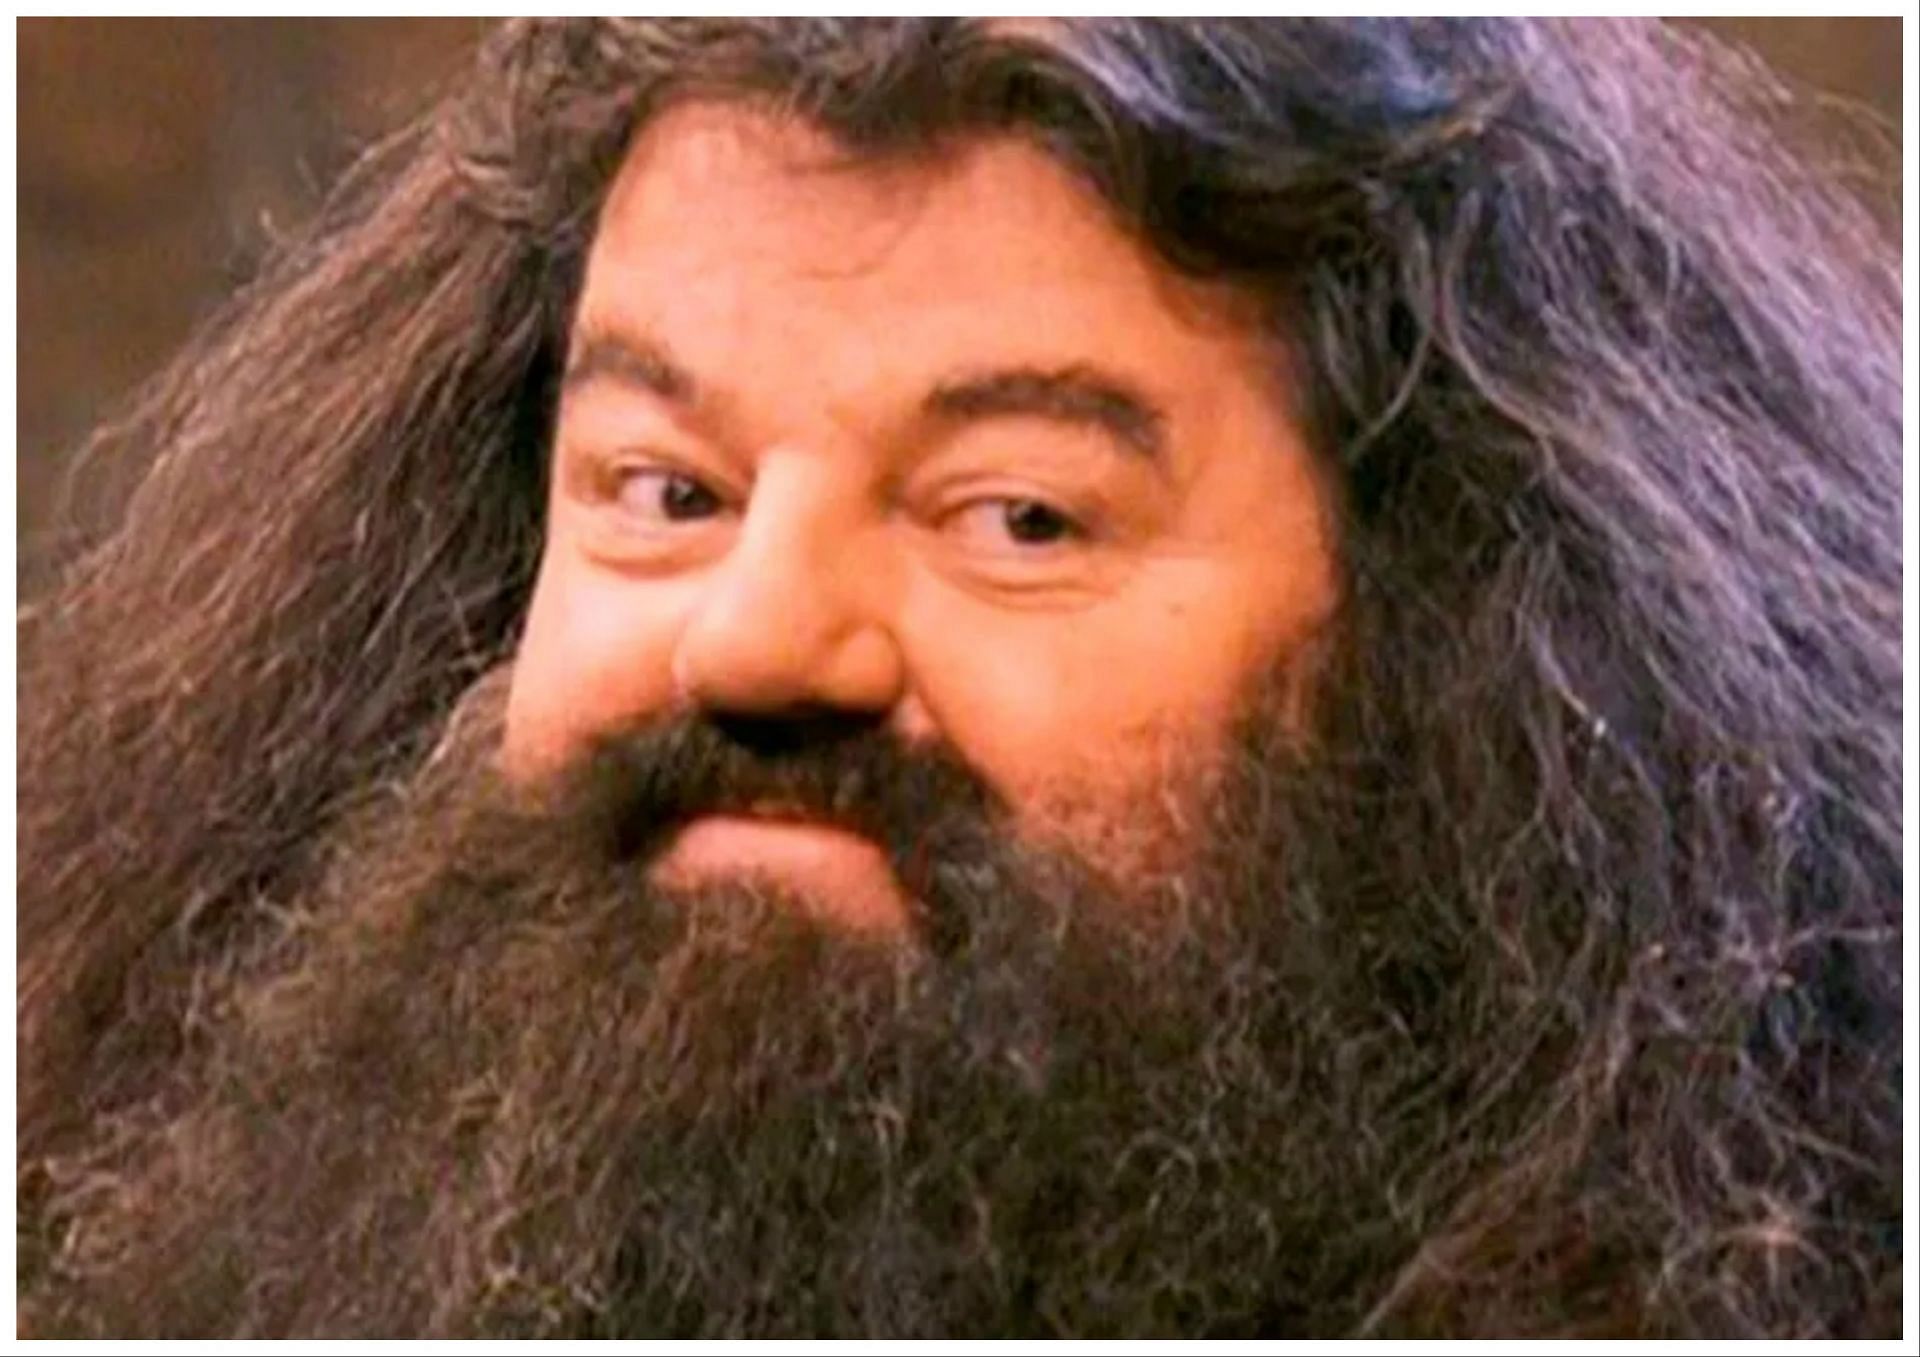 Robbie Coltrane passed away at the age of 72 (Image via Harry Potter movie)